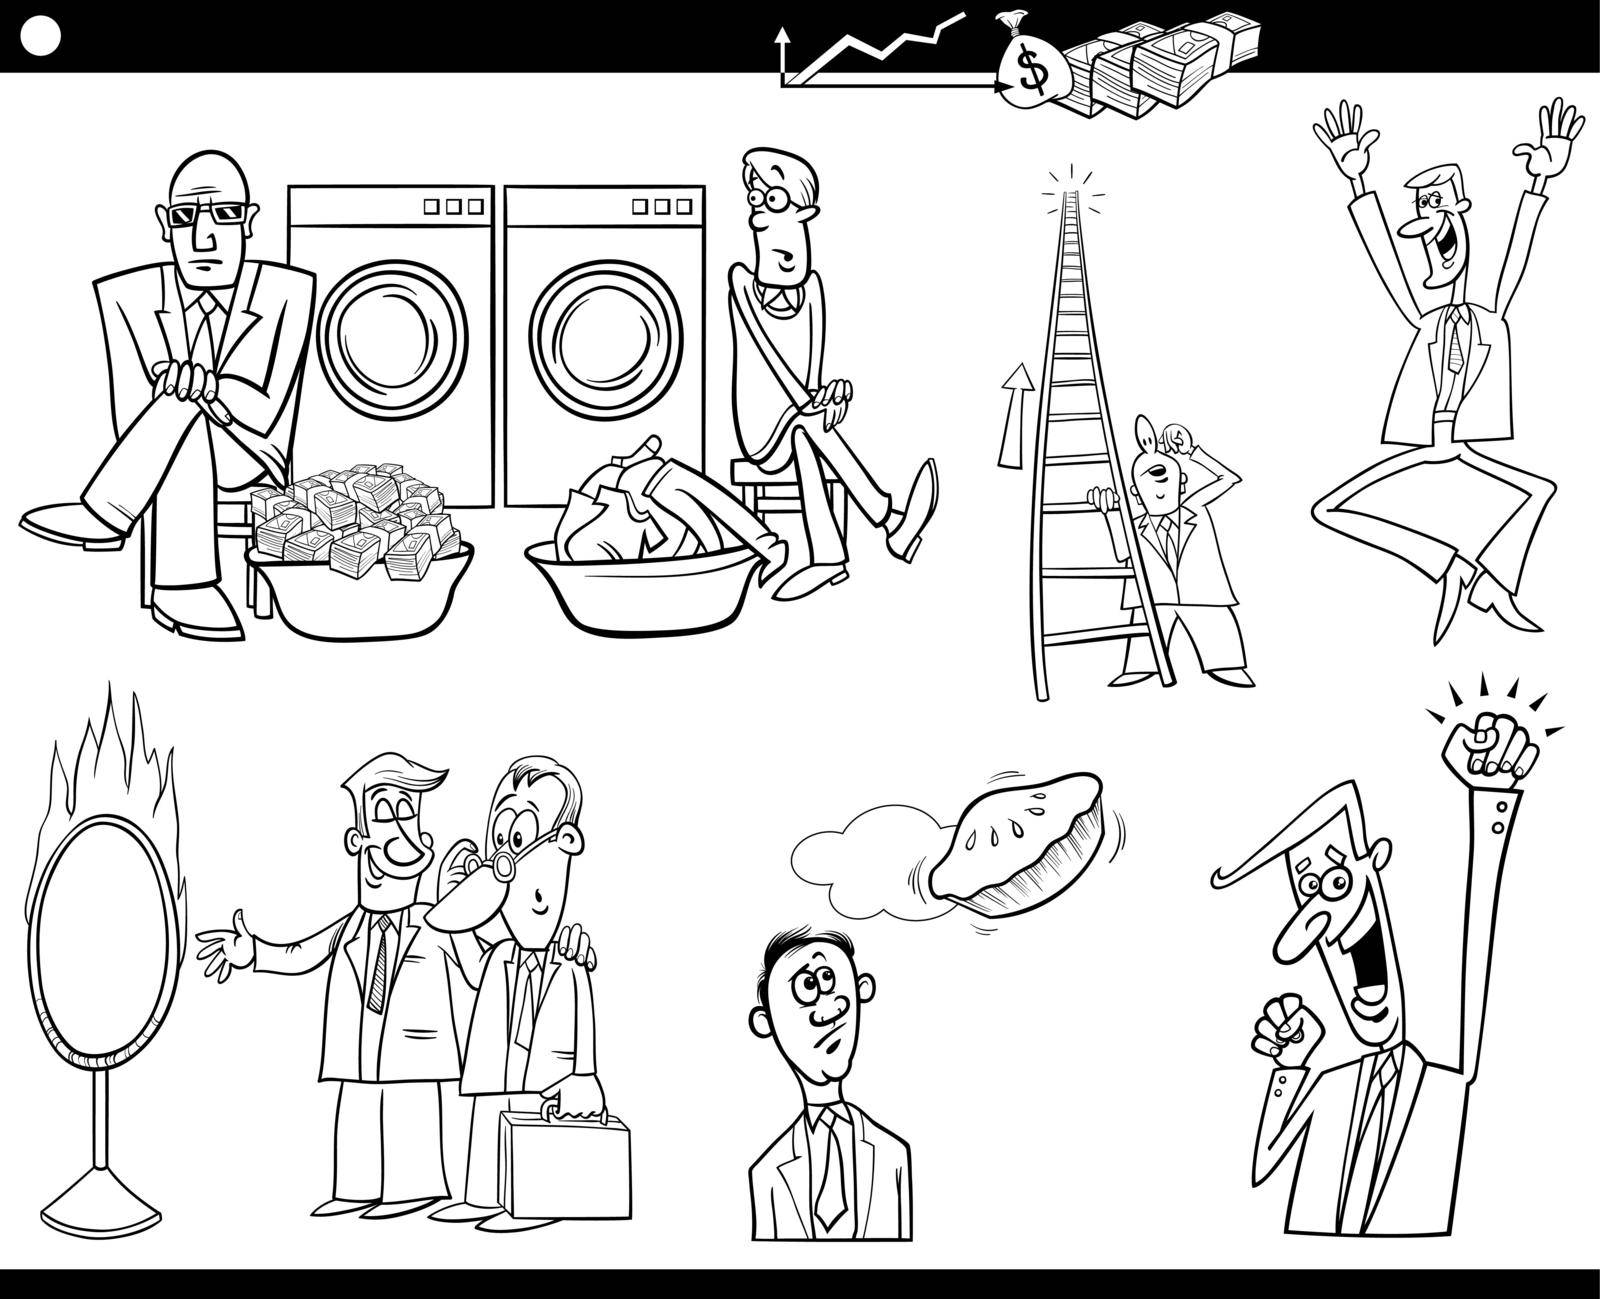 black and white cartoon business concepts and people set by izakowski